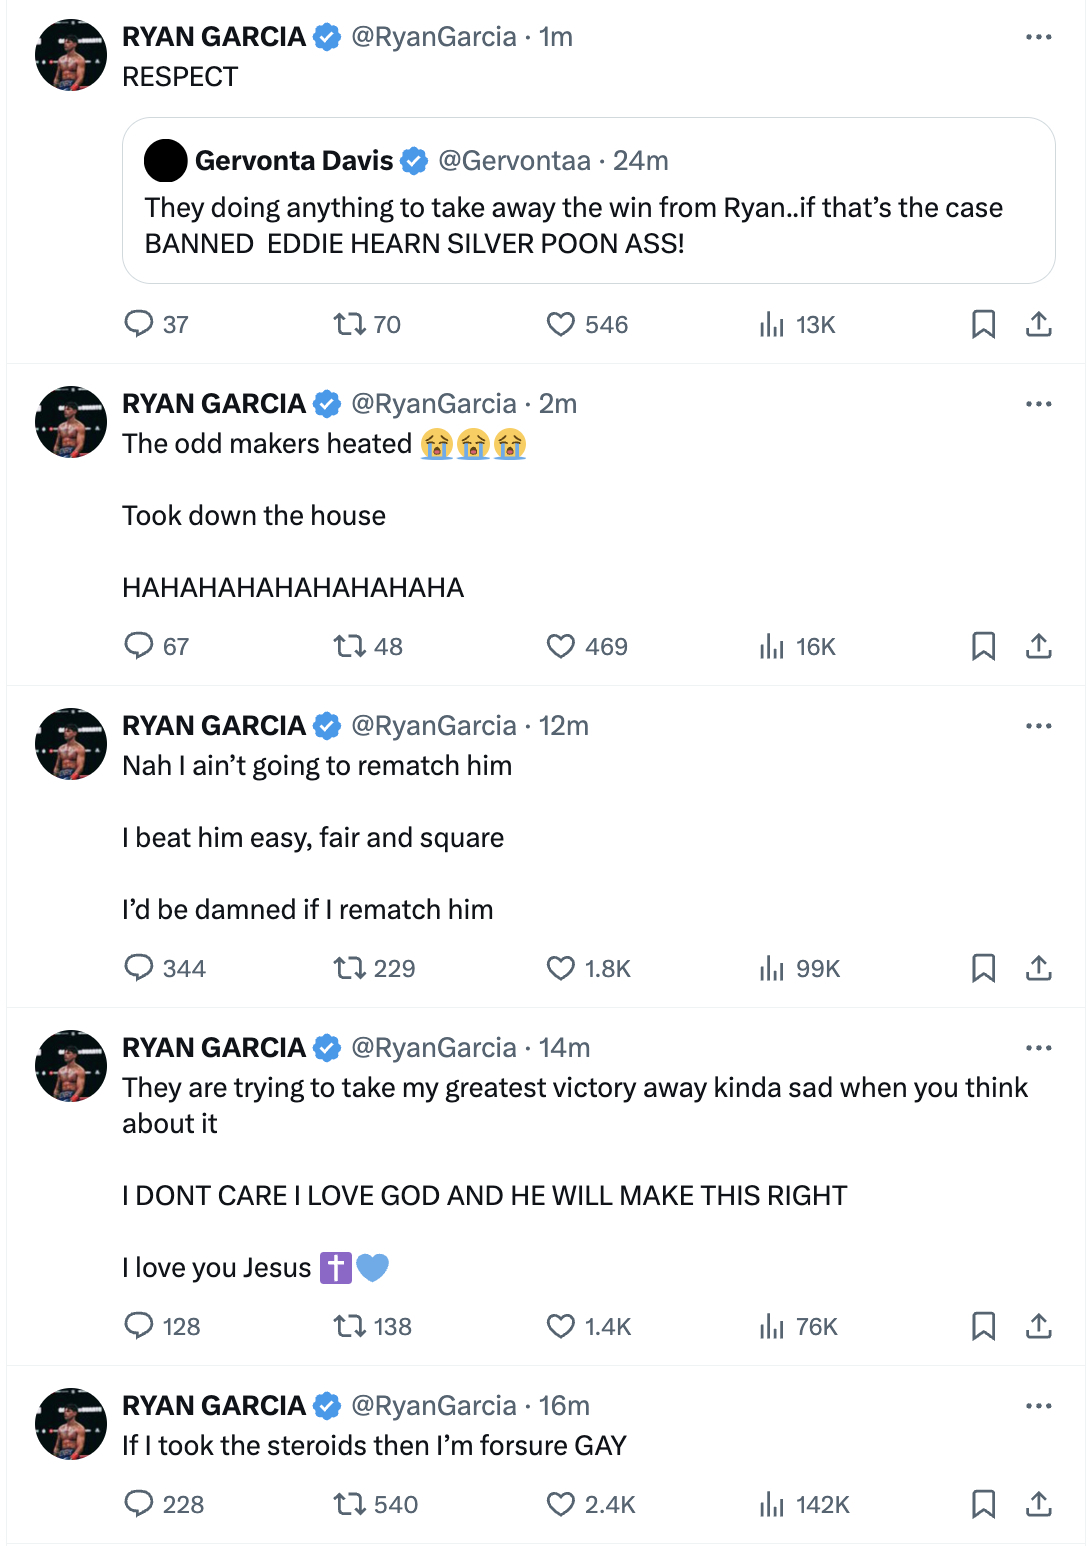 Text exchange between Ryan Garcia and Gervonta Davis on Twitter regarding an upcoming boxing match. They express competitive banter